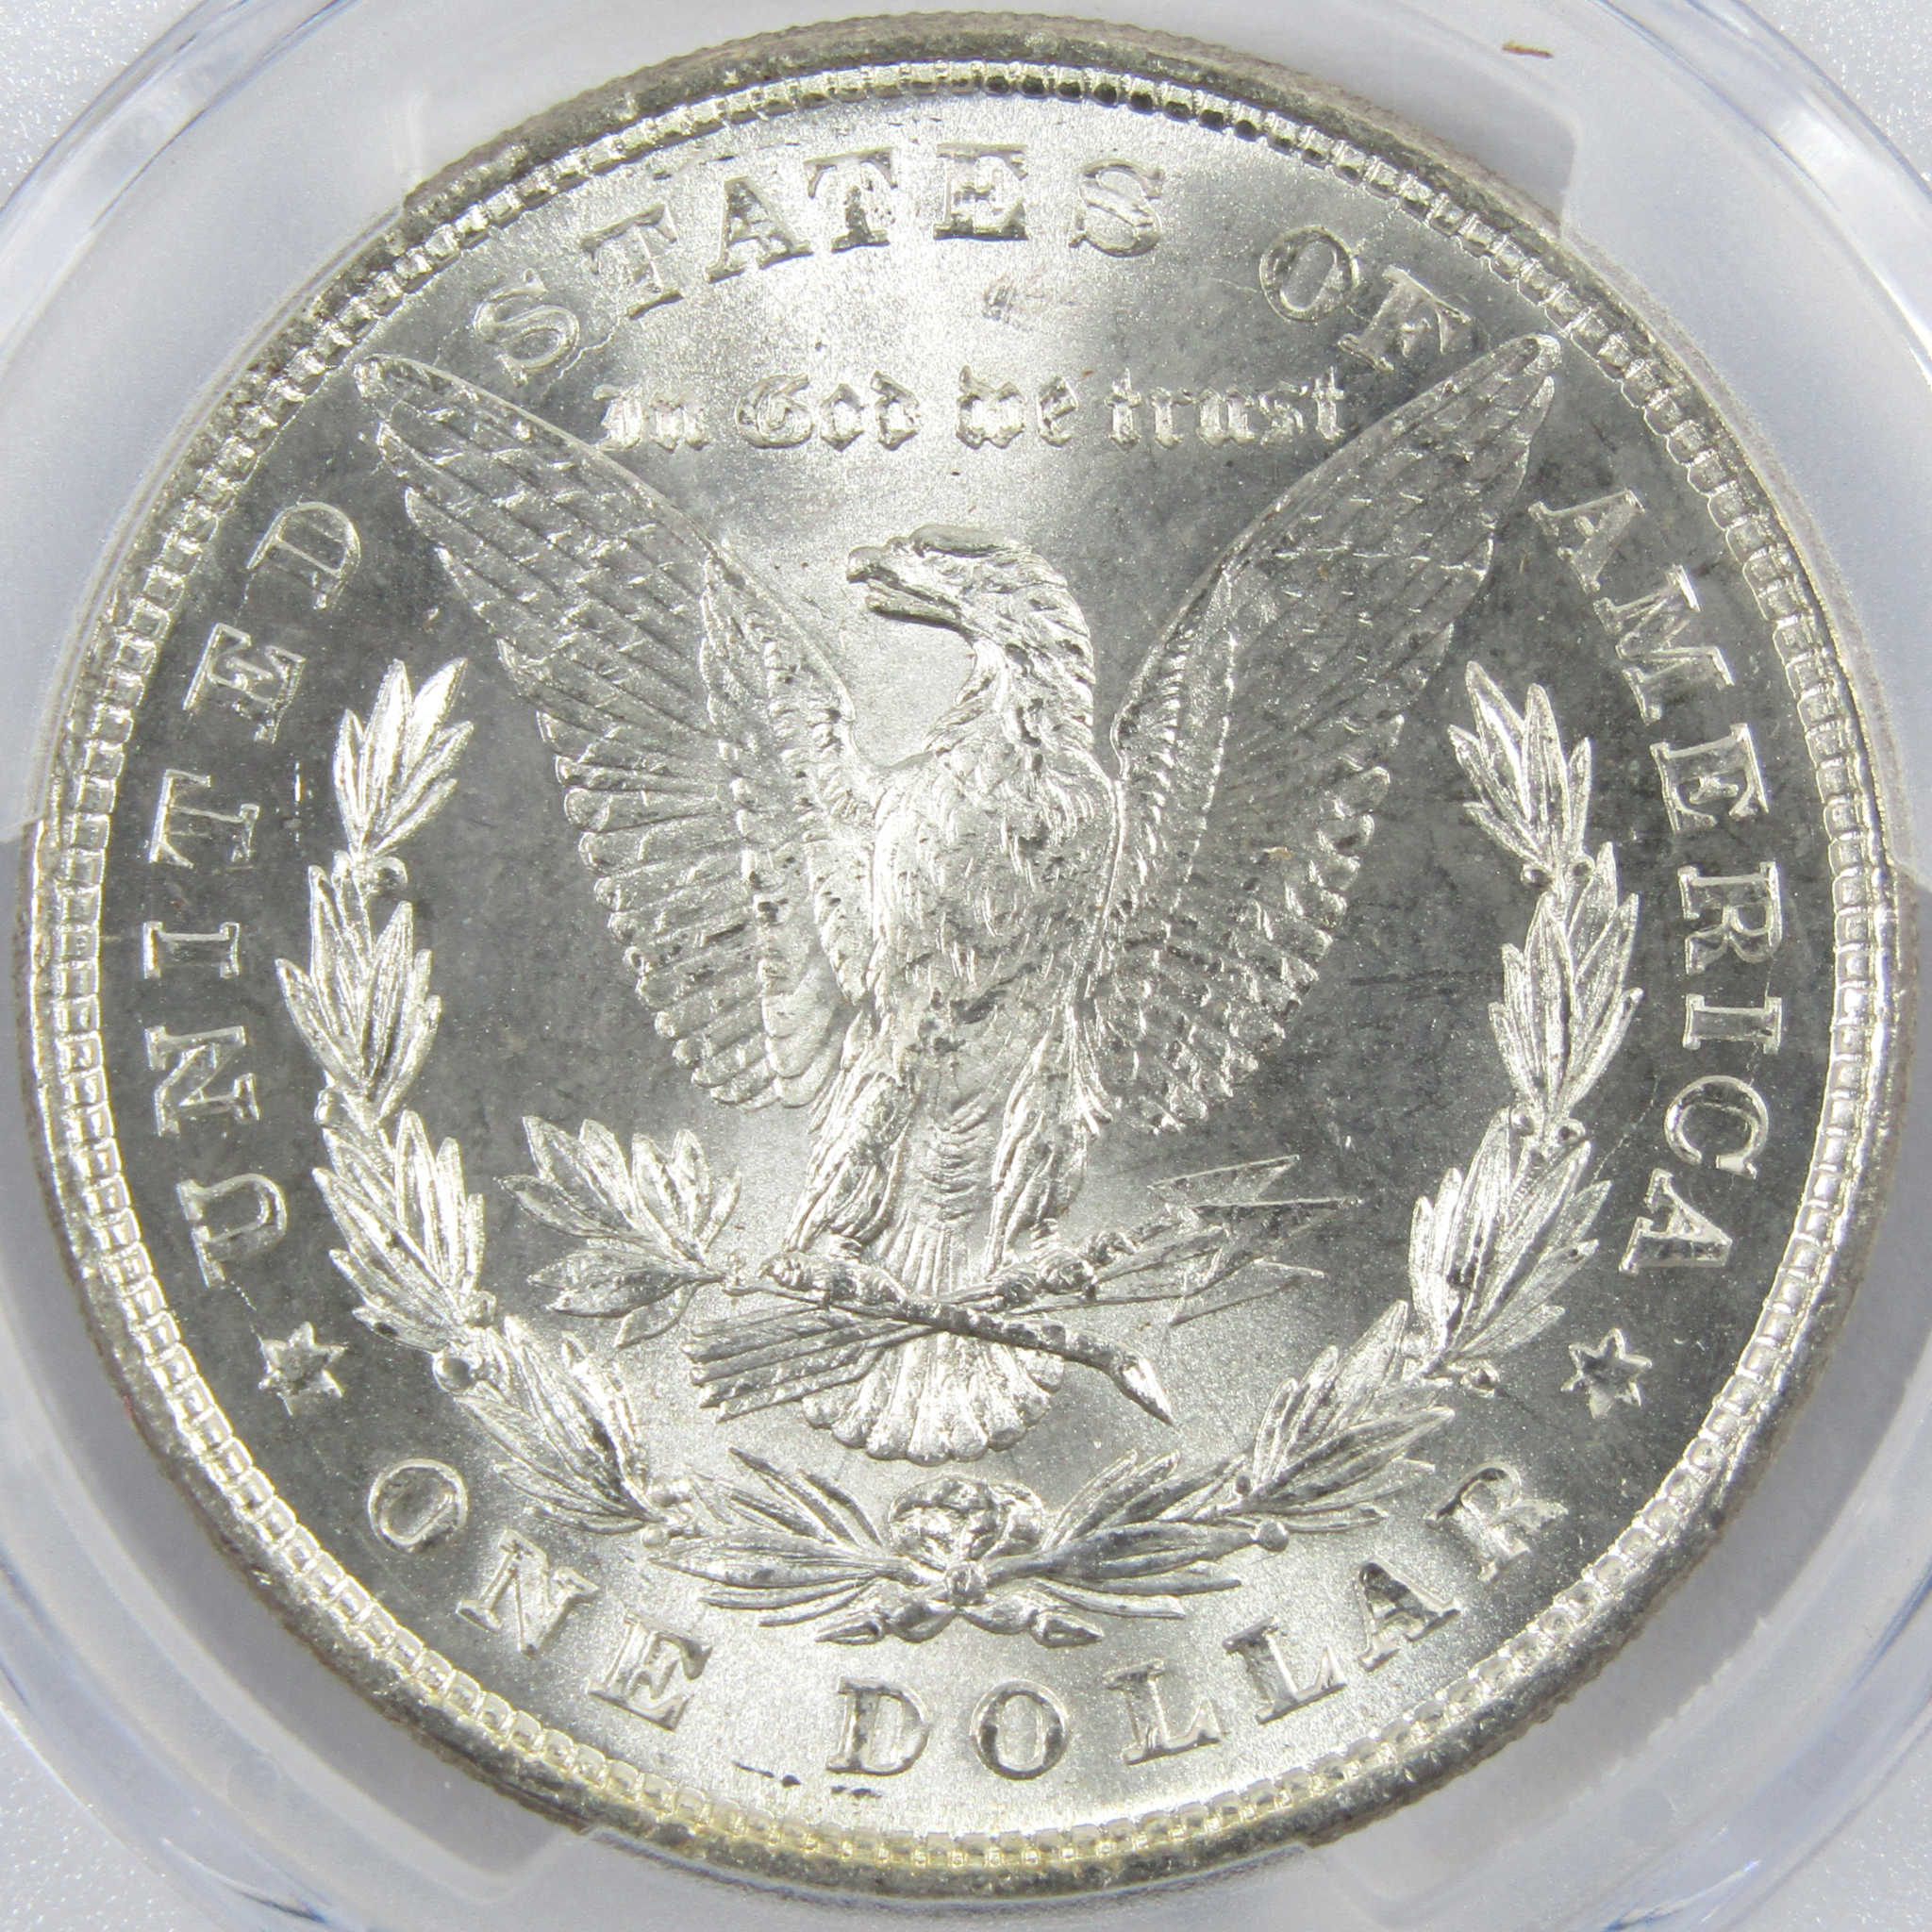 1878 8TF Morgan Dollar MS 63 PCGS 90% Silver $1 Uncirculated SKU:I5903 - Morgan coin - Morgan silver dollar - Morgan silver dollar for sale - Profile Coins &amp; Collectibles